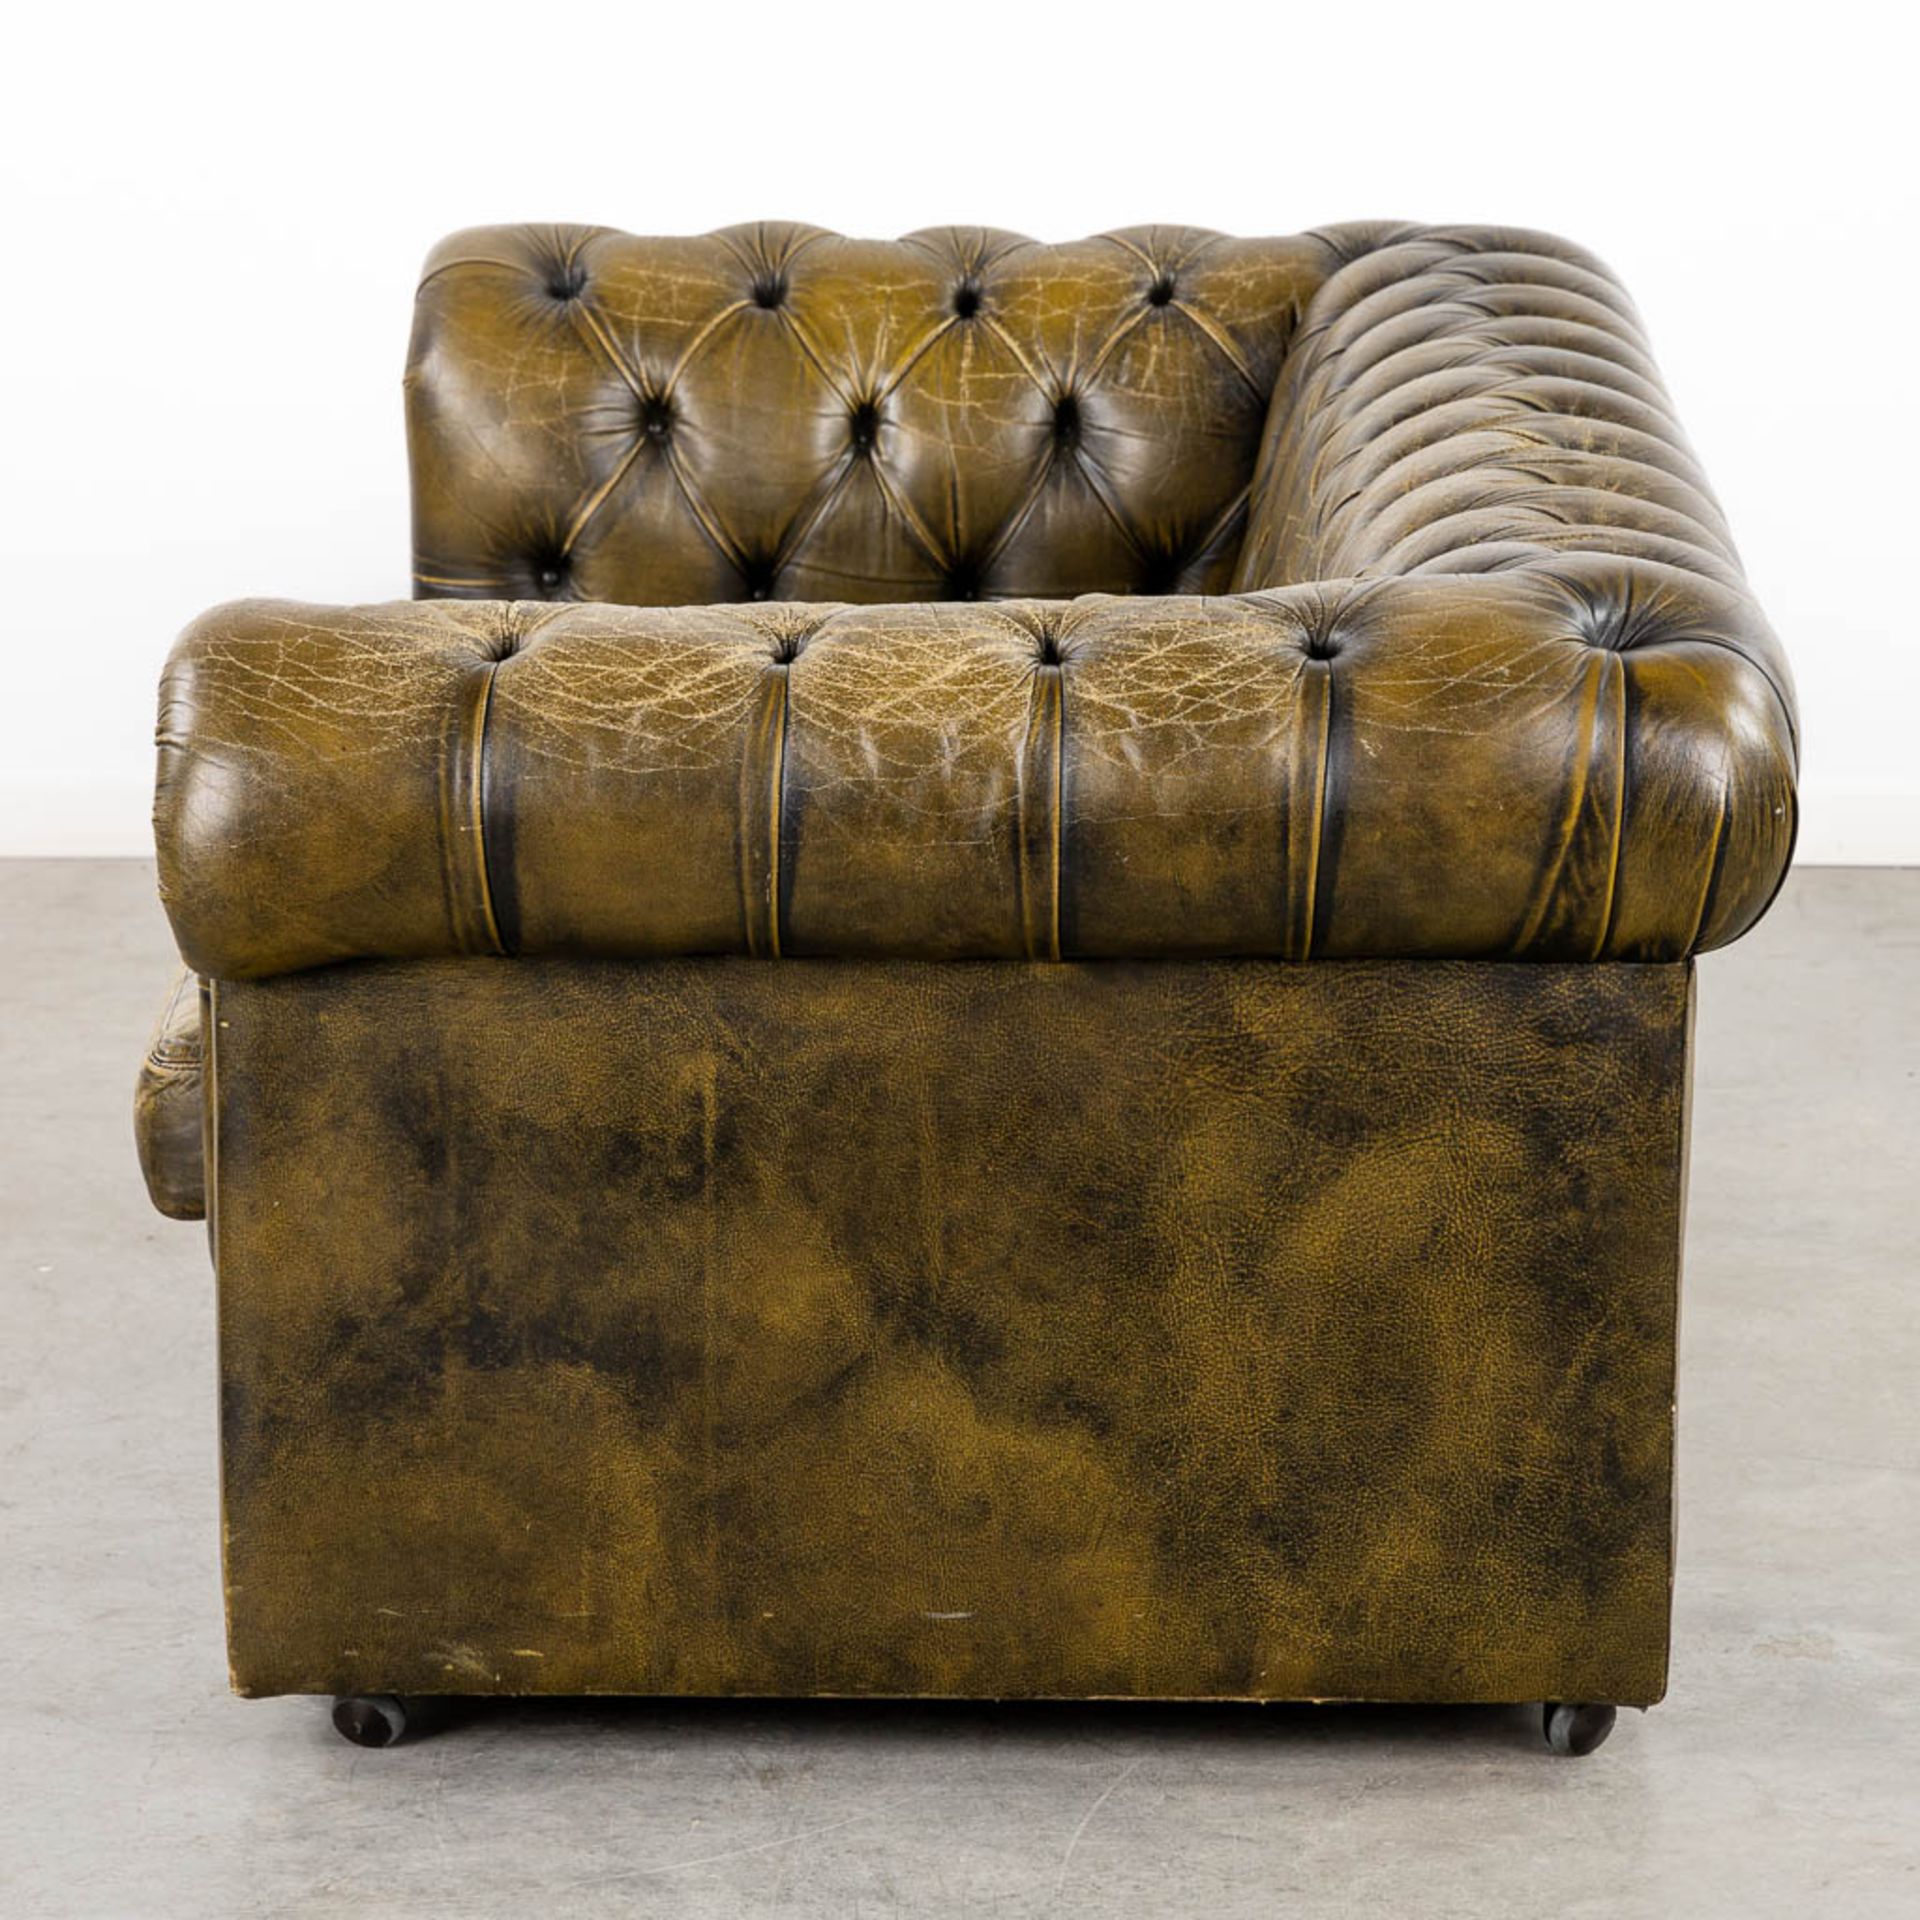 A Chesterfield three-person, green leather sofa. (L:90 x W:188 x H:68 cm) - Image 4 of 13